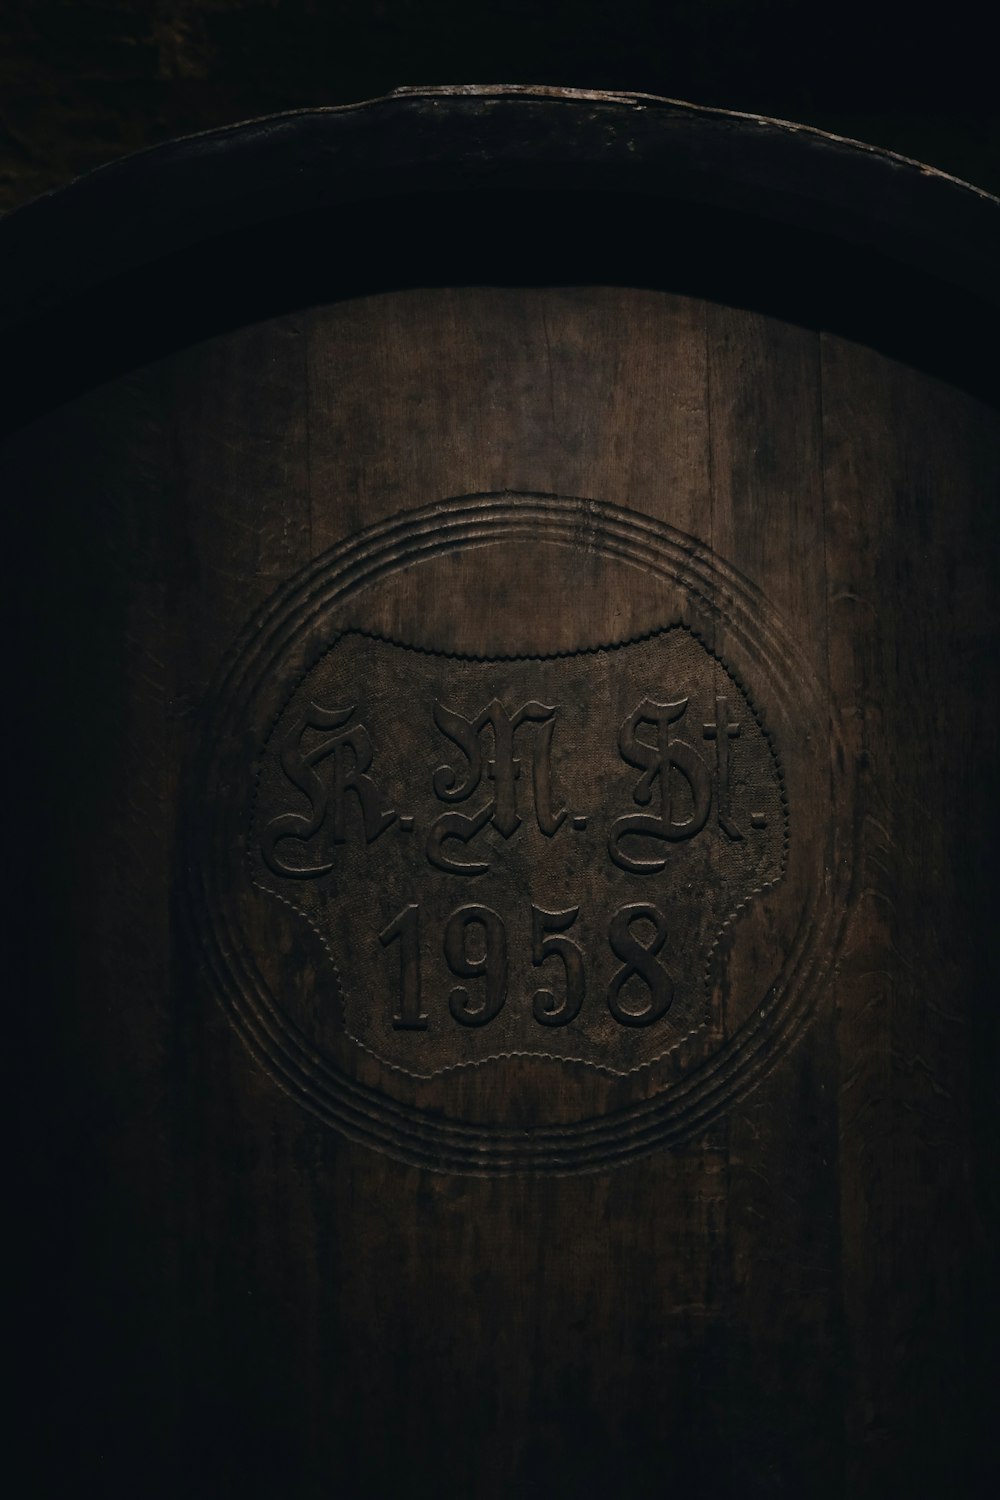 a close up of a wooden barrel with a logo on it